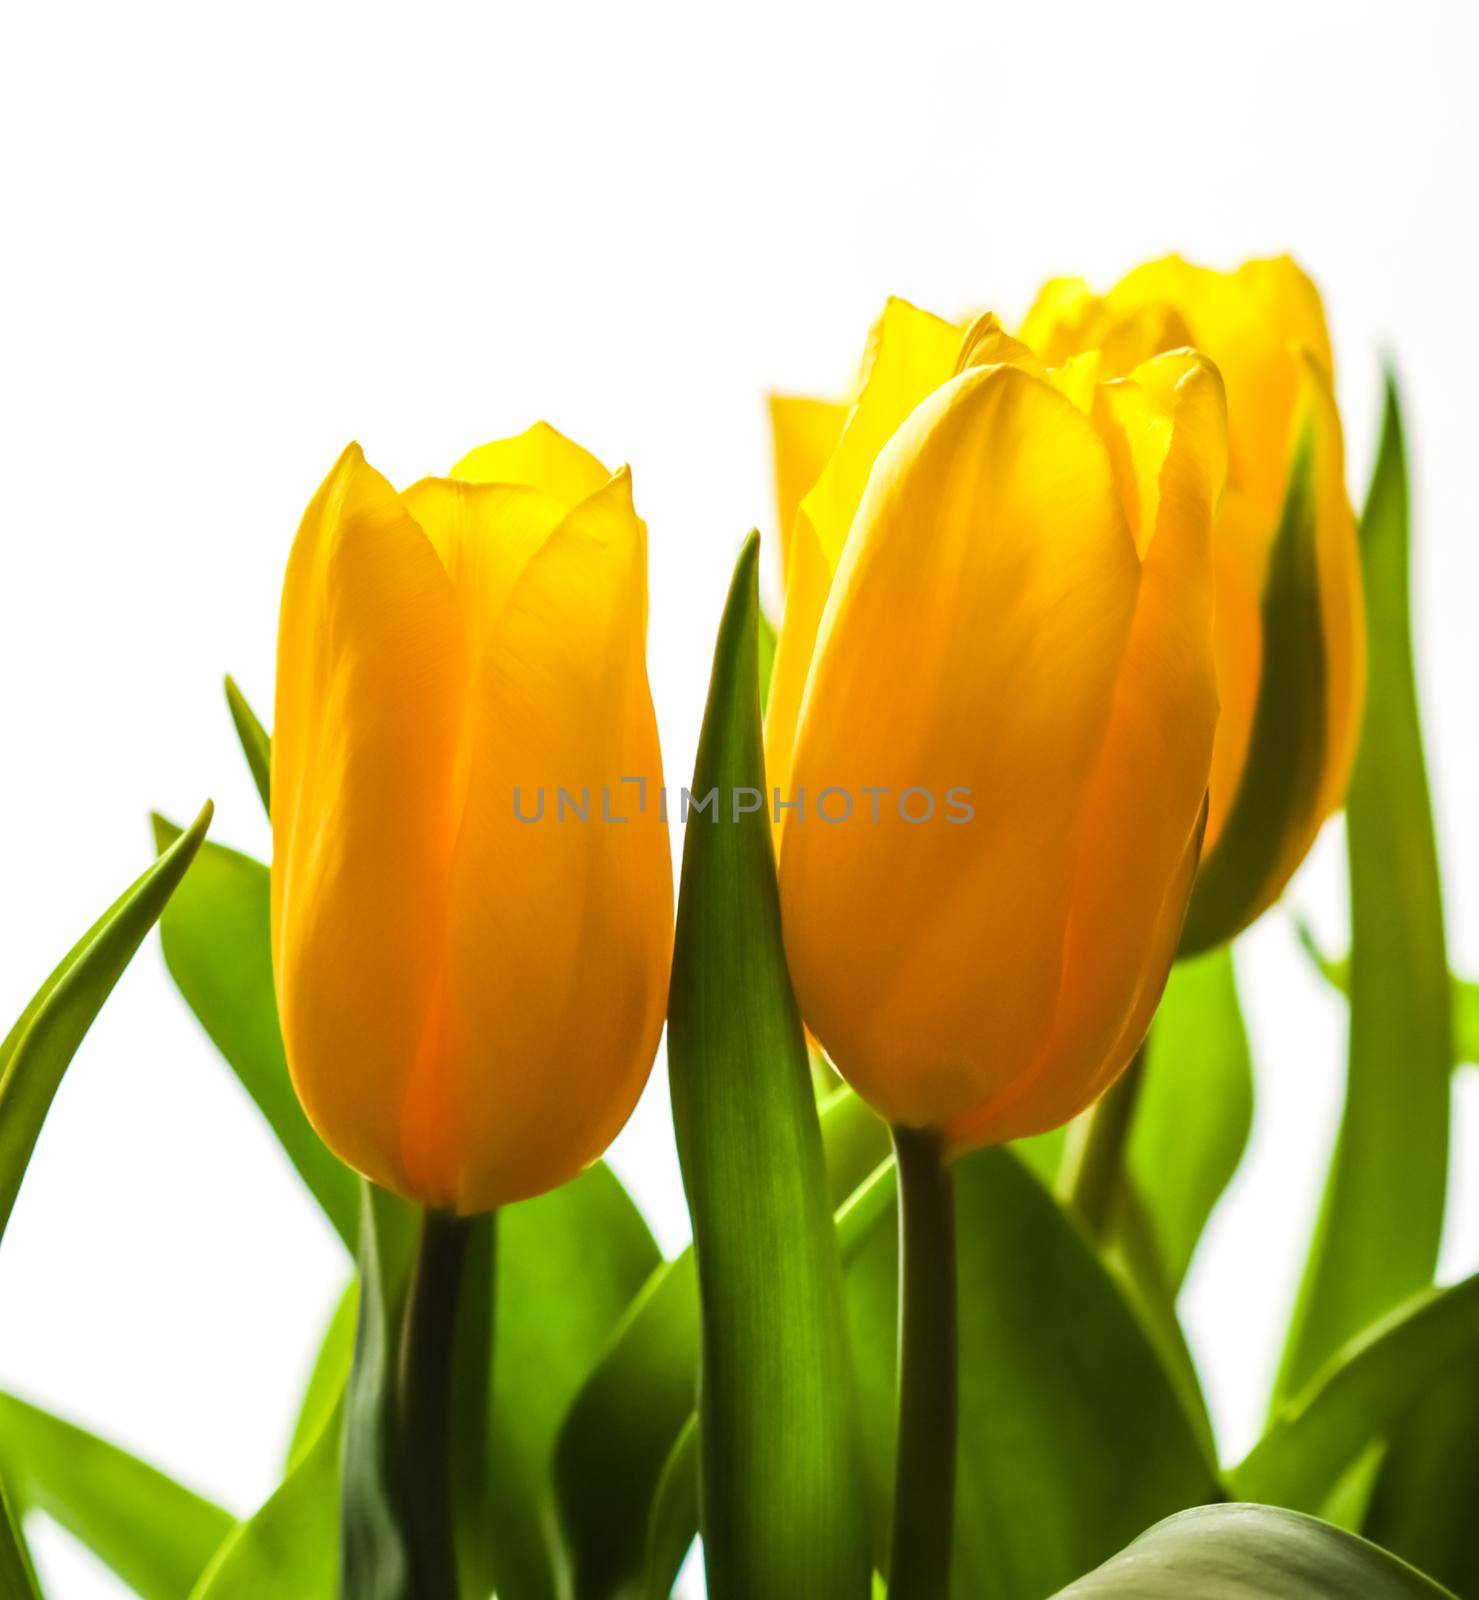 Bouquet of yellow tulips lit by sunlight on a white background by Olayola